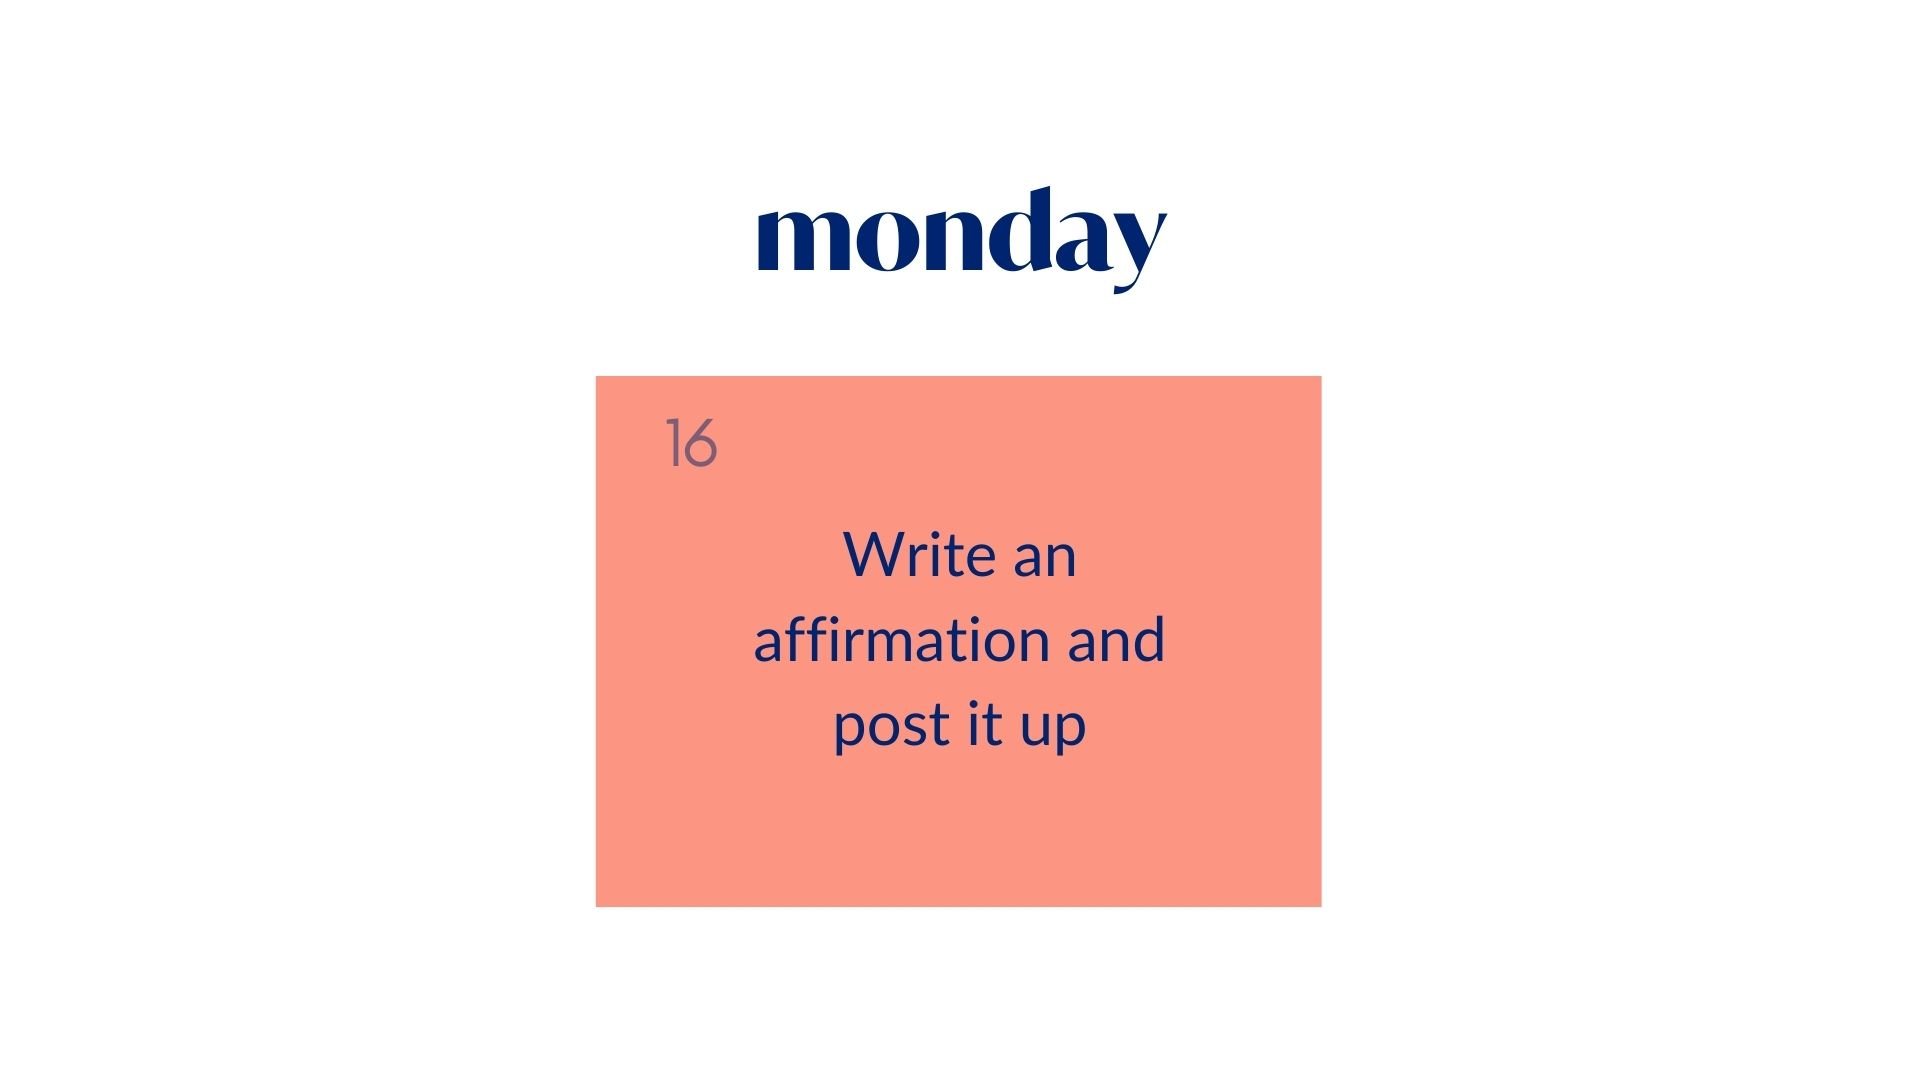 Day 16: Write an affirmation and post it up